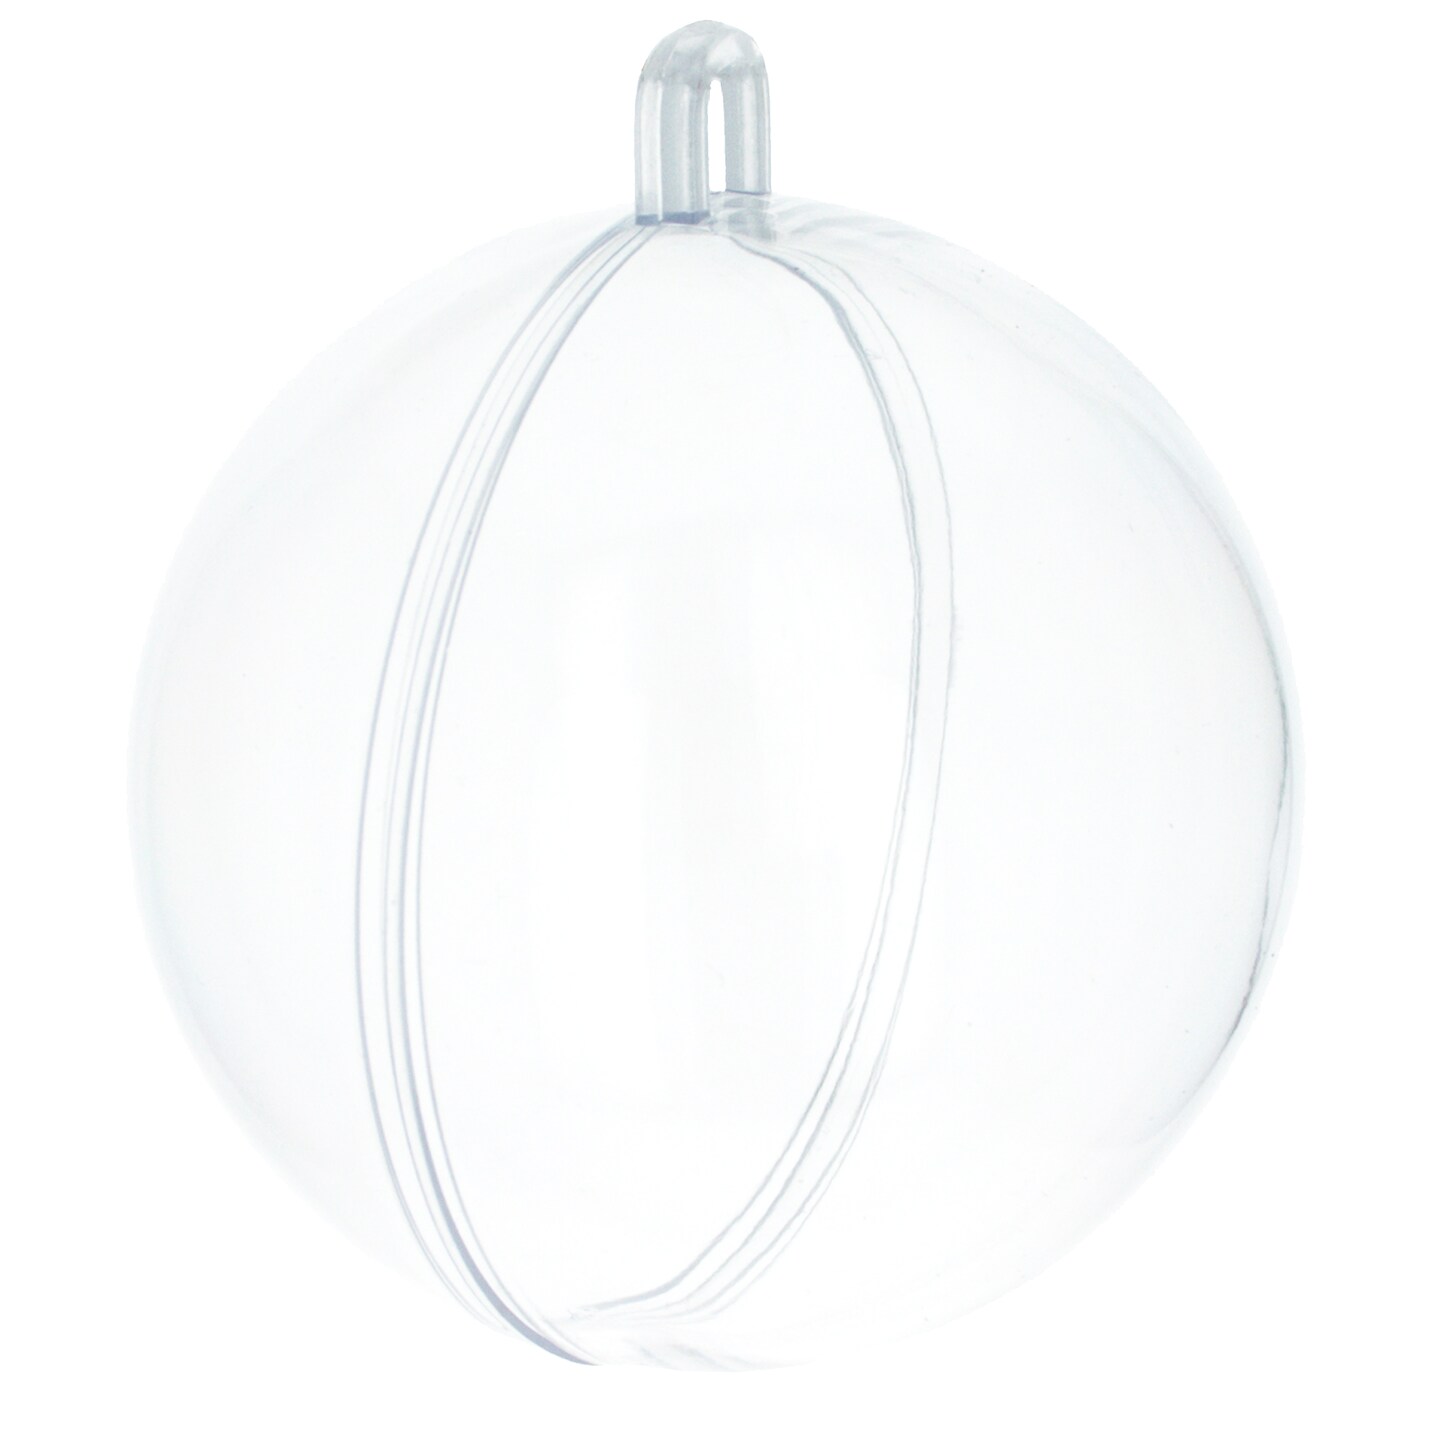 2.7-Inch Clear Plastic Fillable Christmas Ball Ornament for DIY Crafting